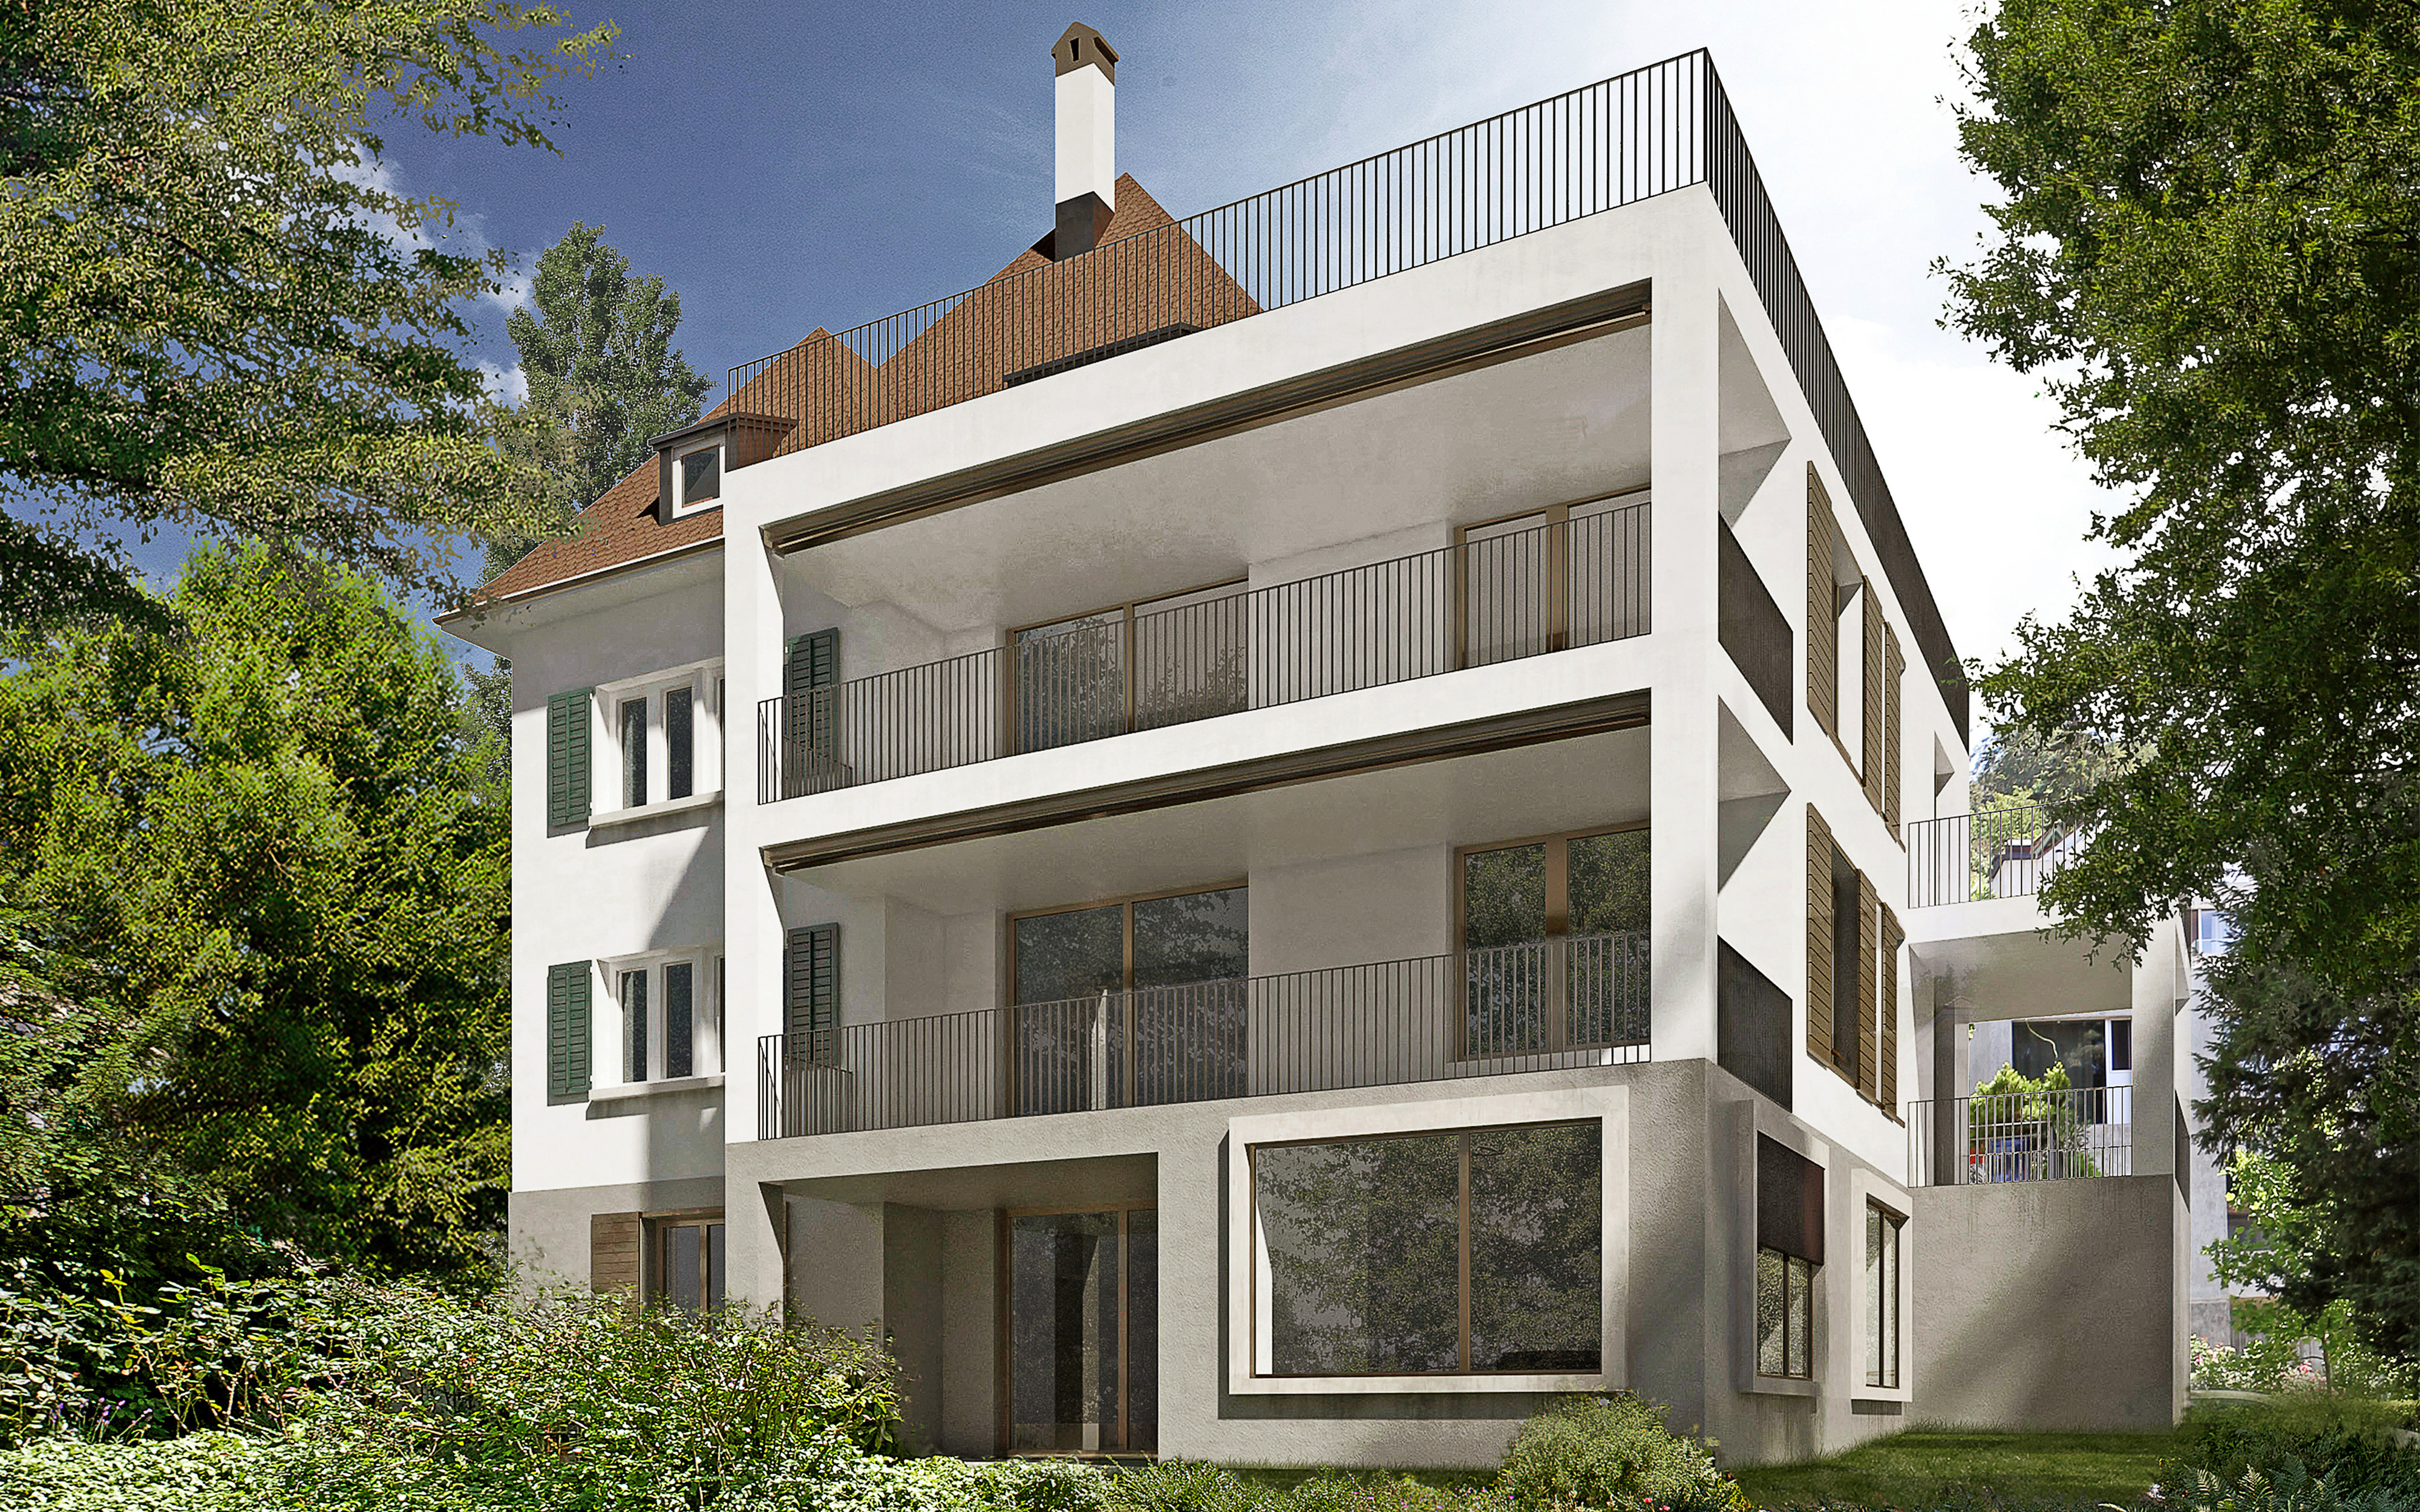 Project competition for multi-family house at Zurichberg